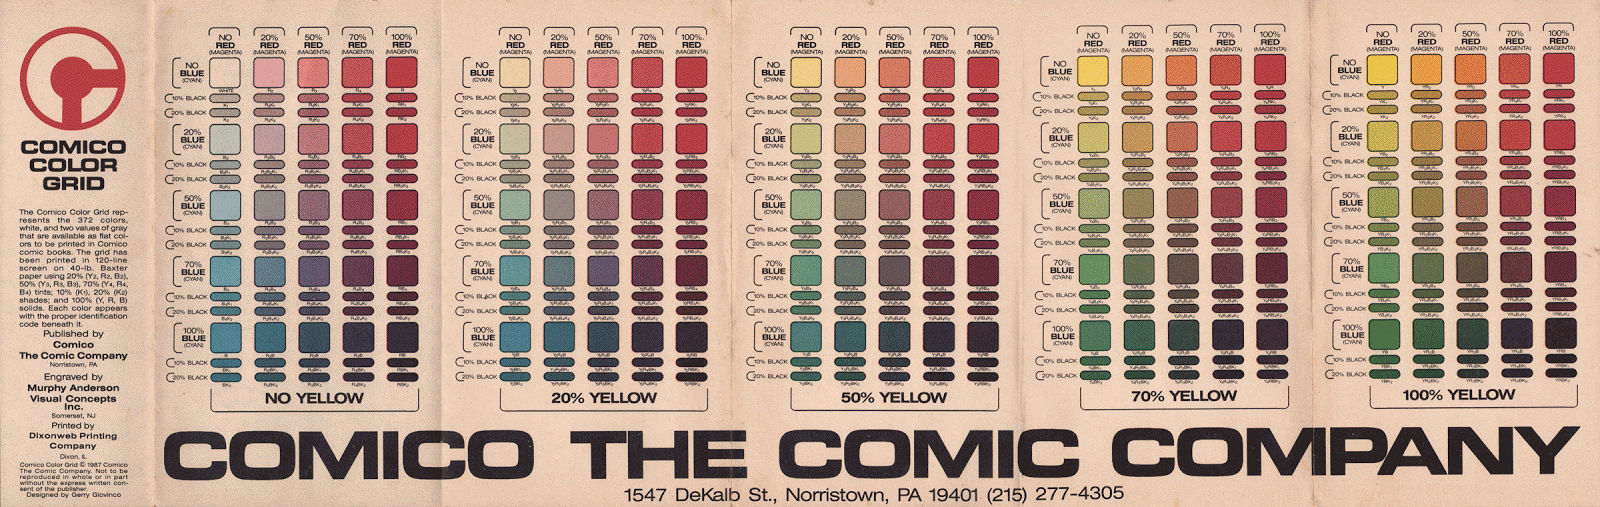 Mad for Mid-Century: Mid-Century Color Palette in Comics